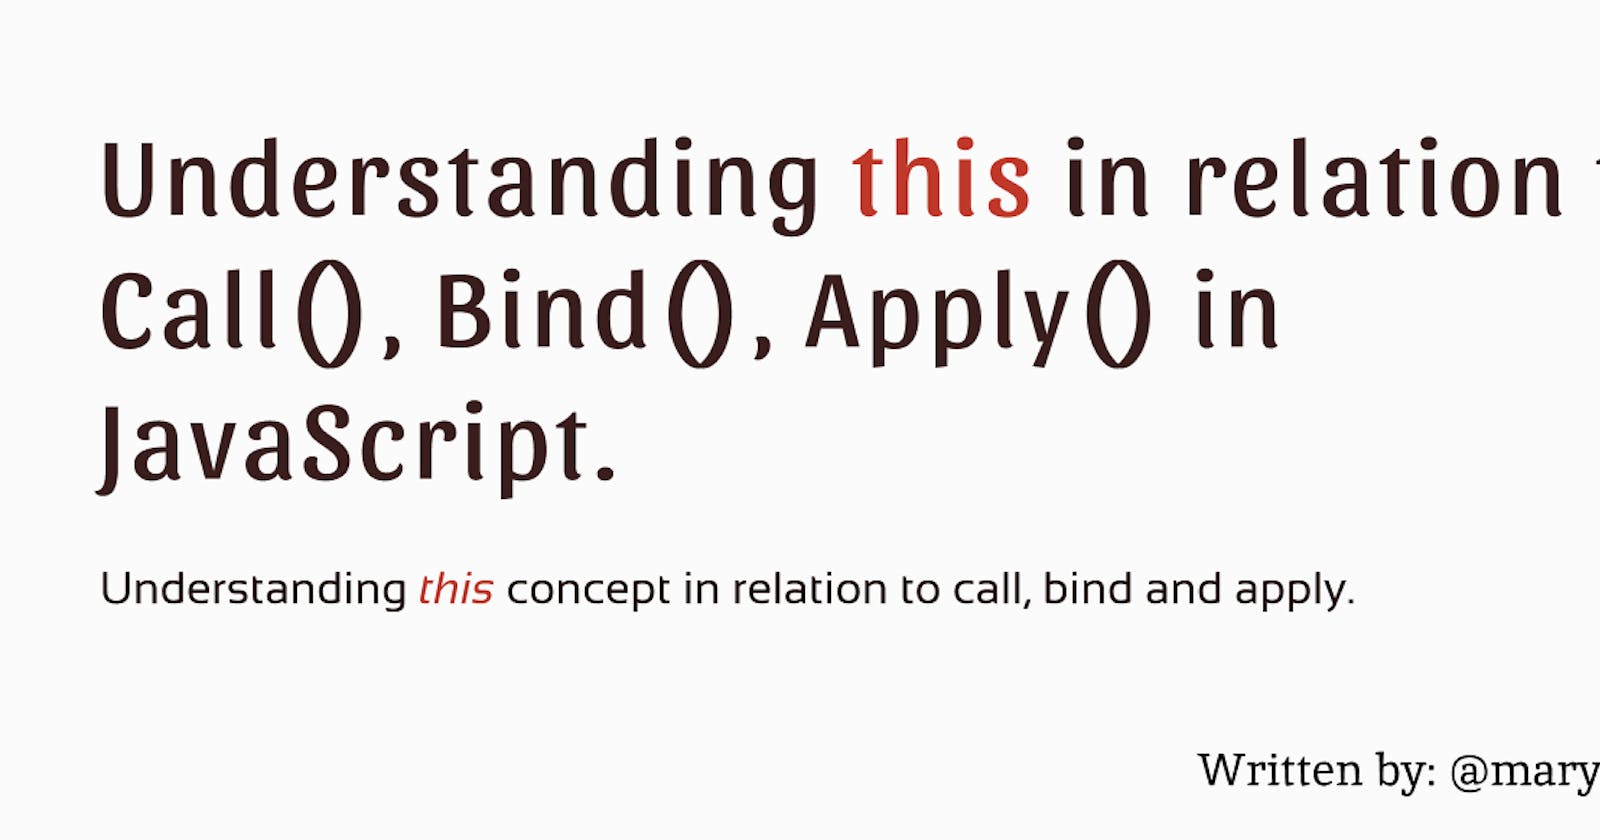 What exactly is 'this'? Understanding JavaScript's Call(), Bind(), and Apply() methods.